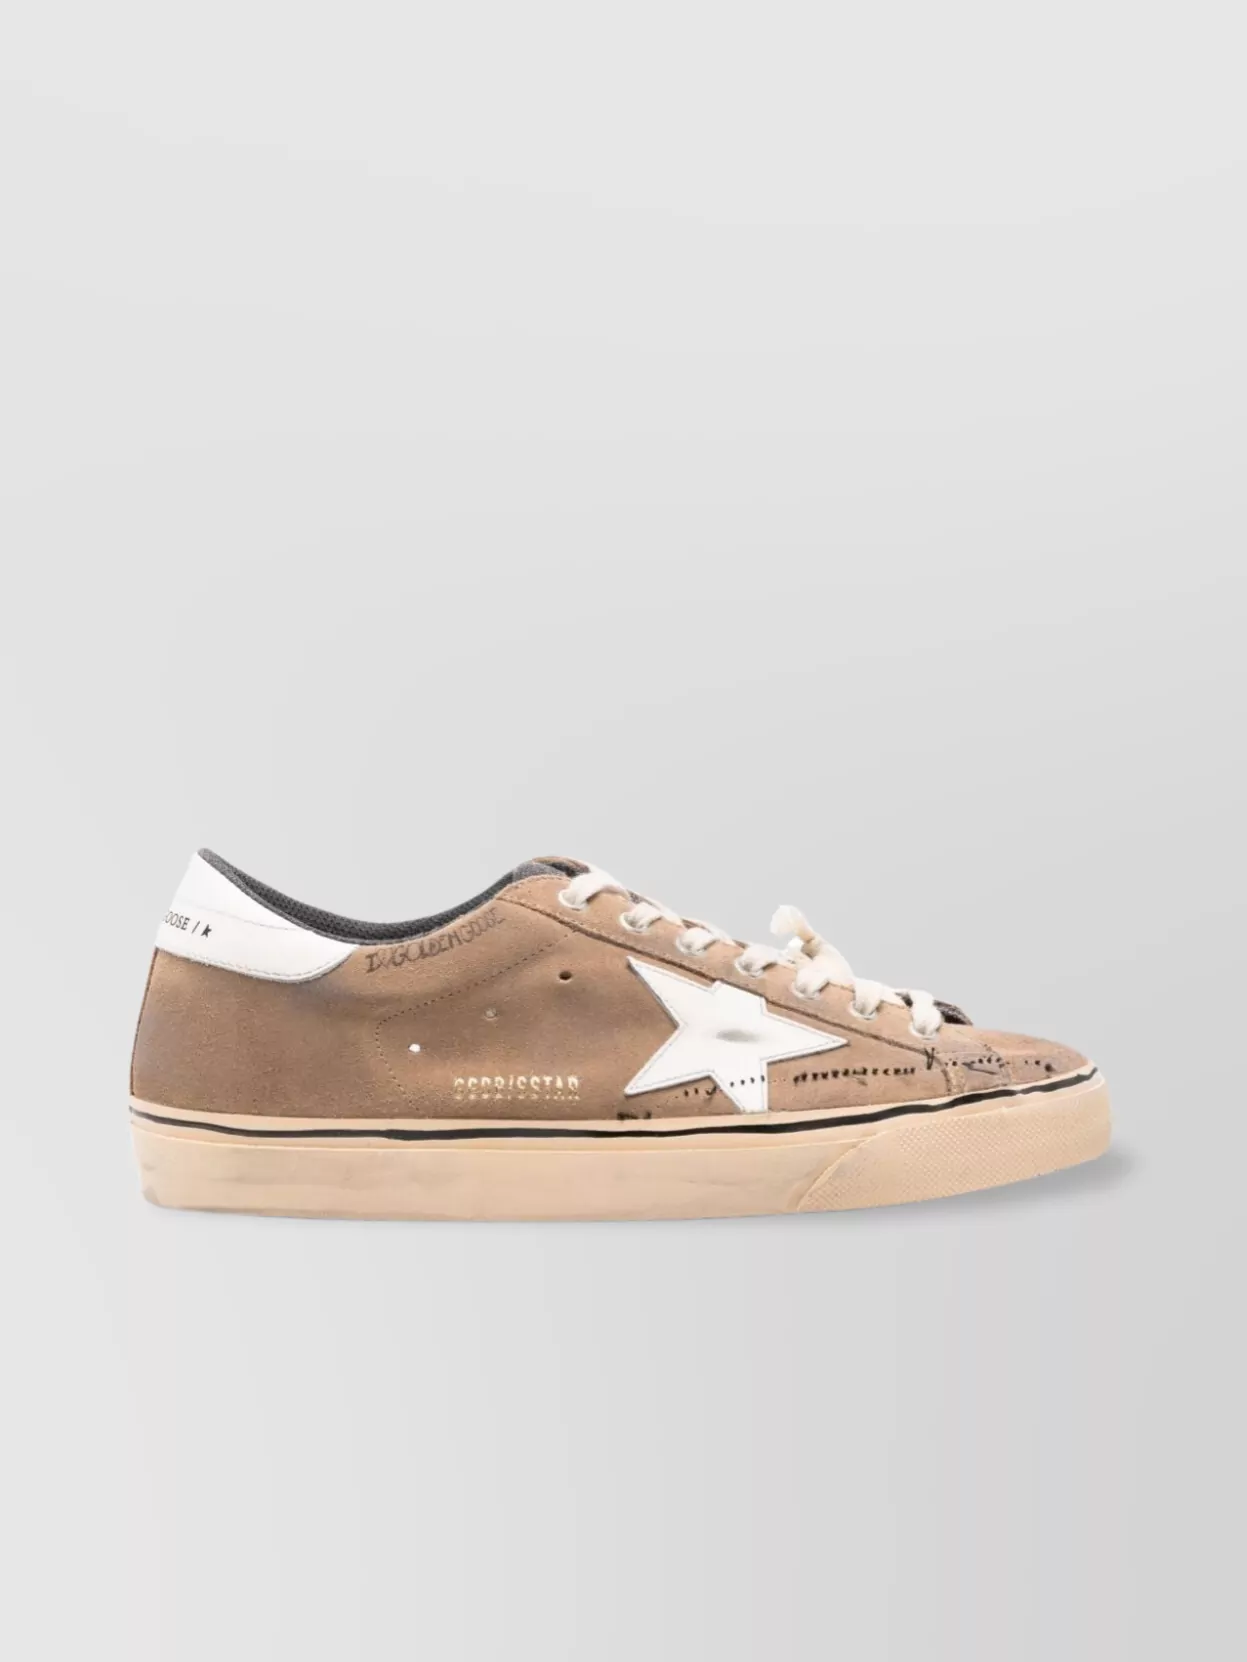 Shop Golden Goose Suede Sneakers With Distressed Detailing And Branded Heel